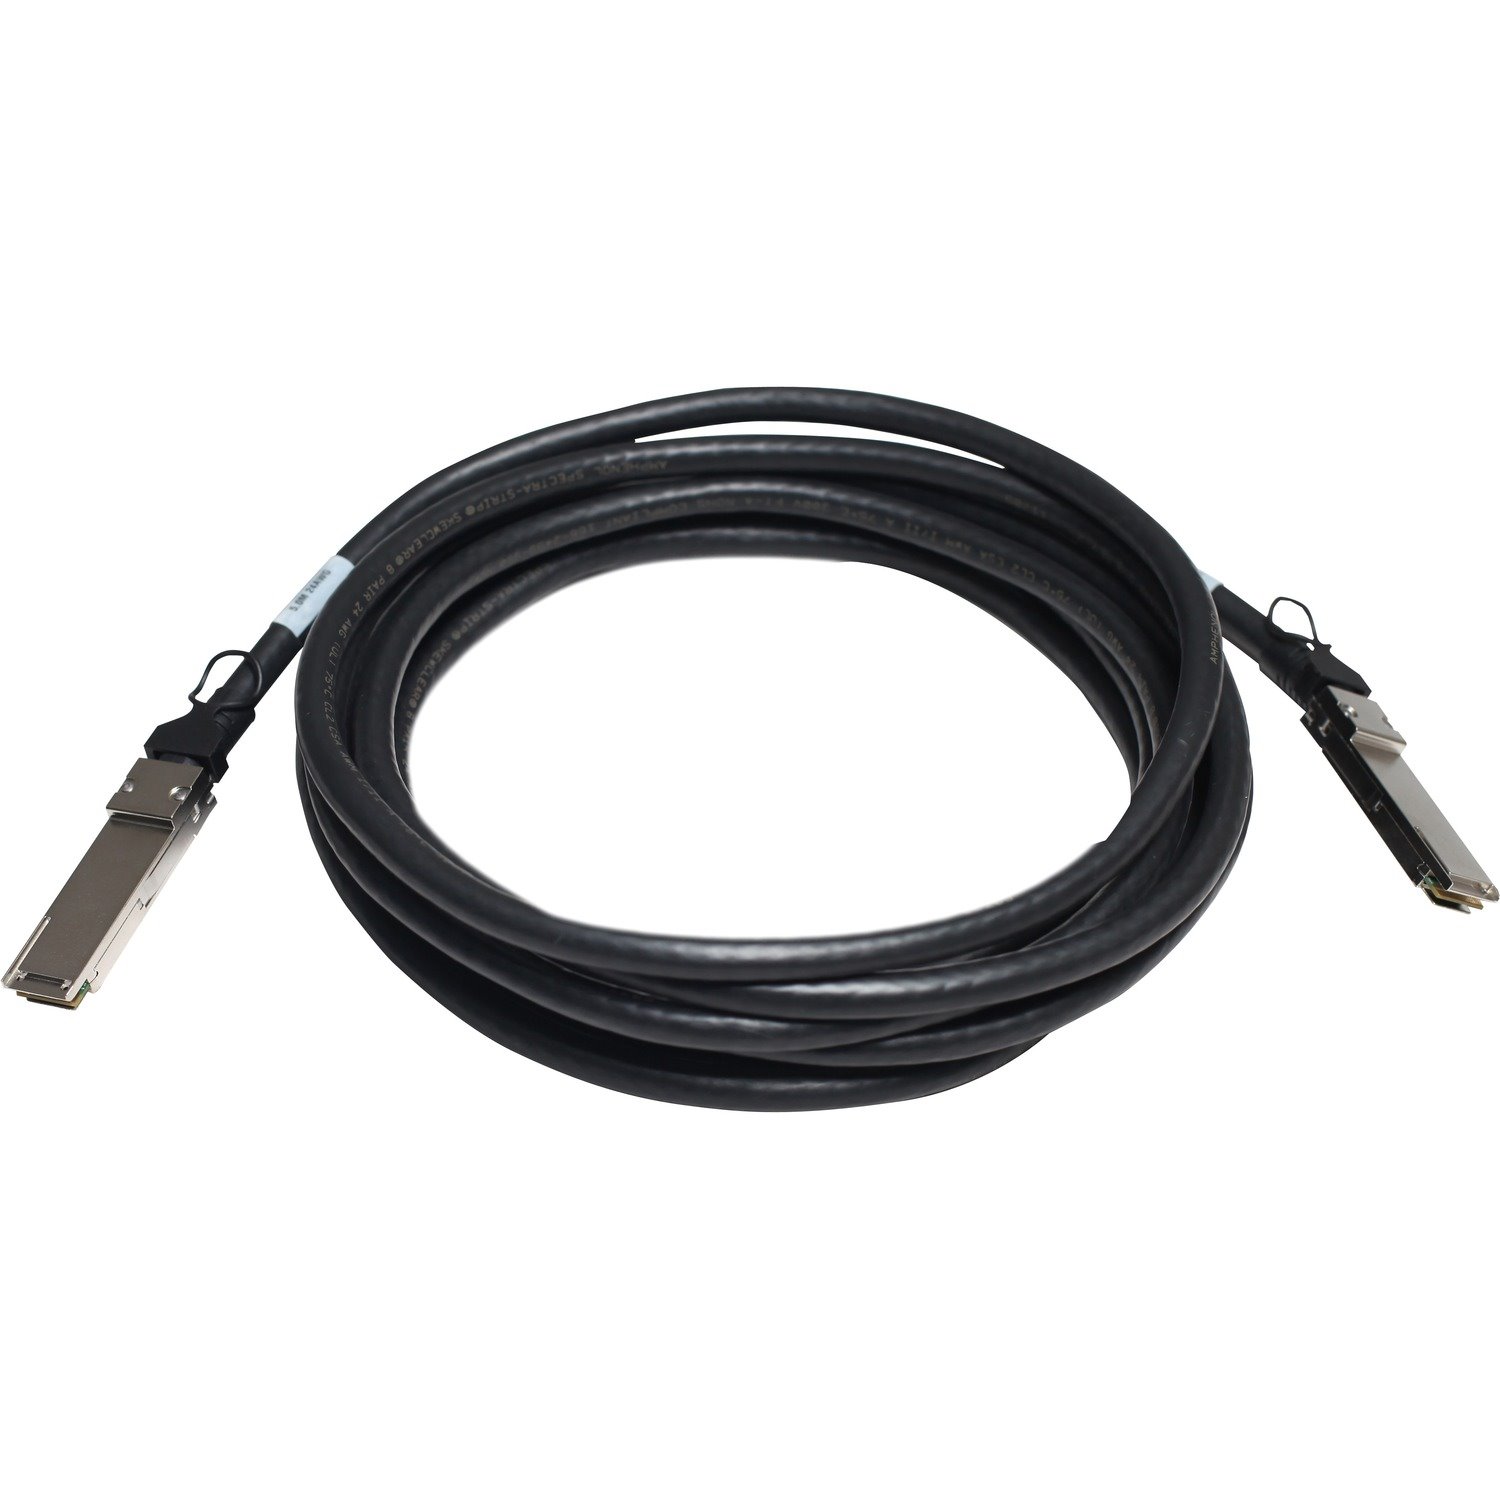 HPE X242 40G QSFP+ to QSFP+ 5m DAC Cable (JH236A)